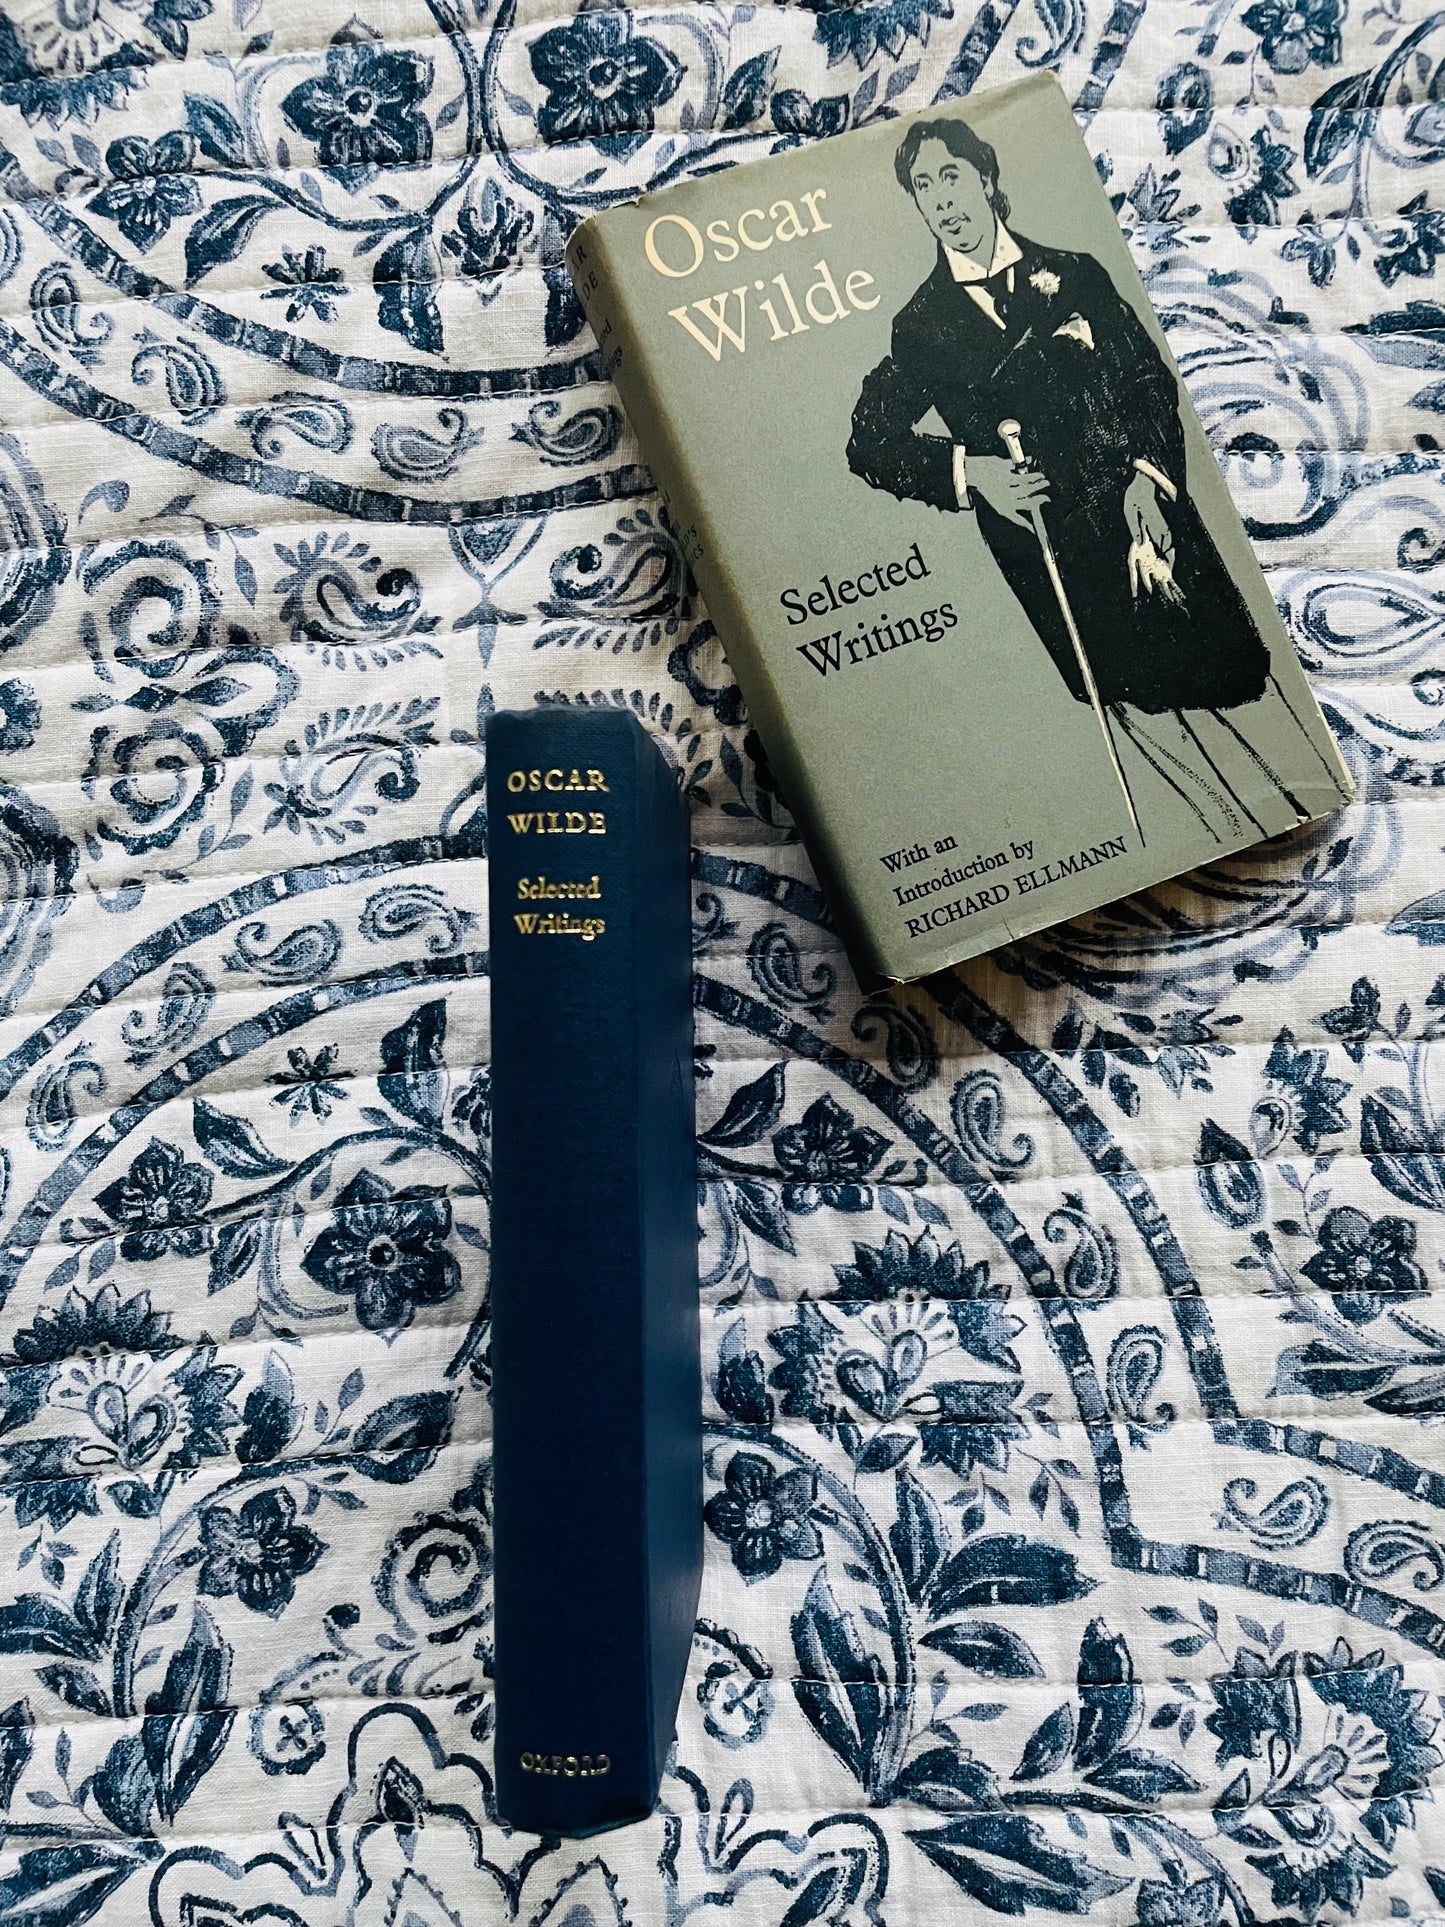 The World's Classics Oscar Wilde Selected Writings with an Introduction by Richard Ellmann Hardcover Book (1961)